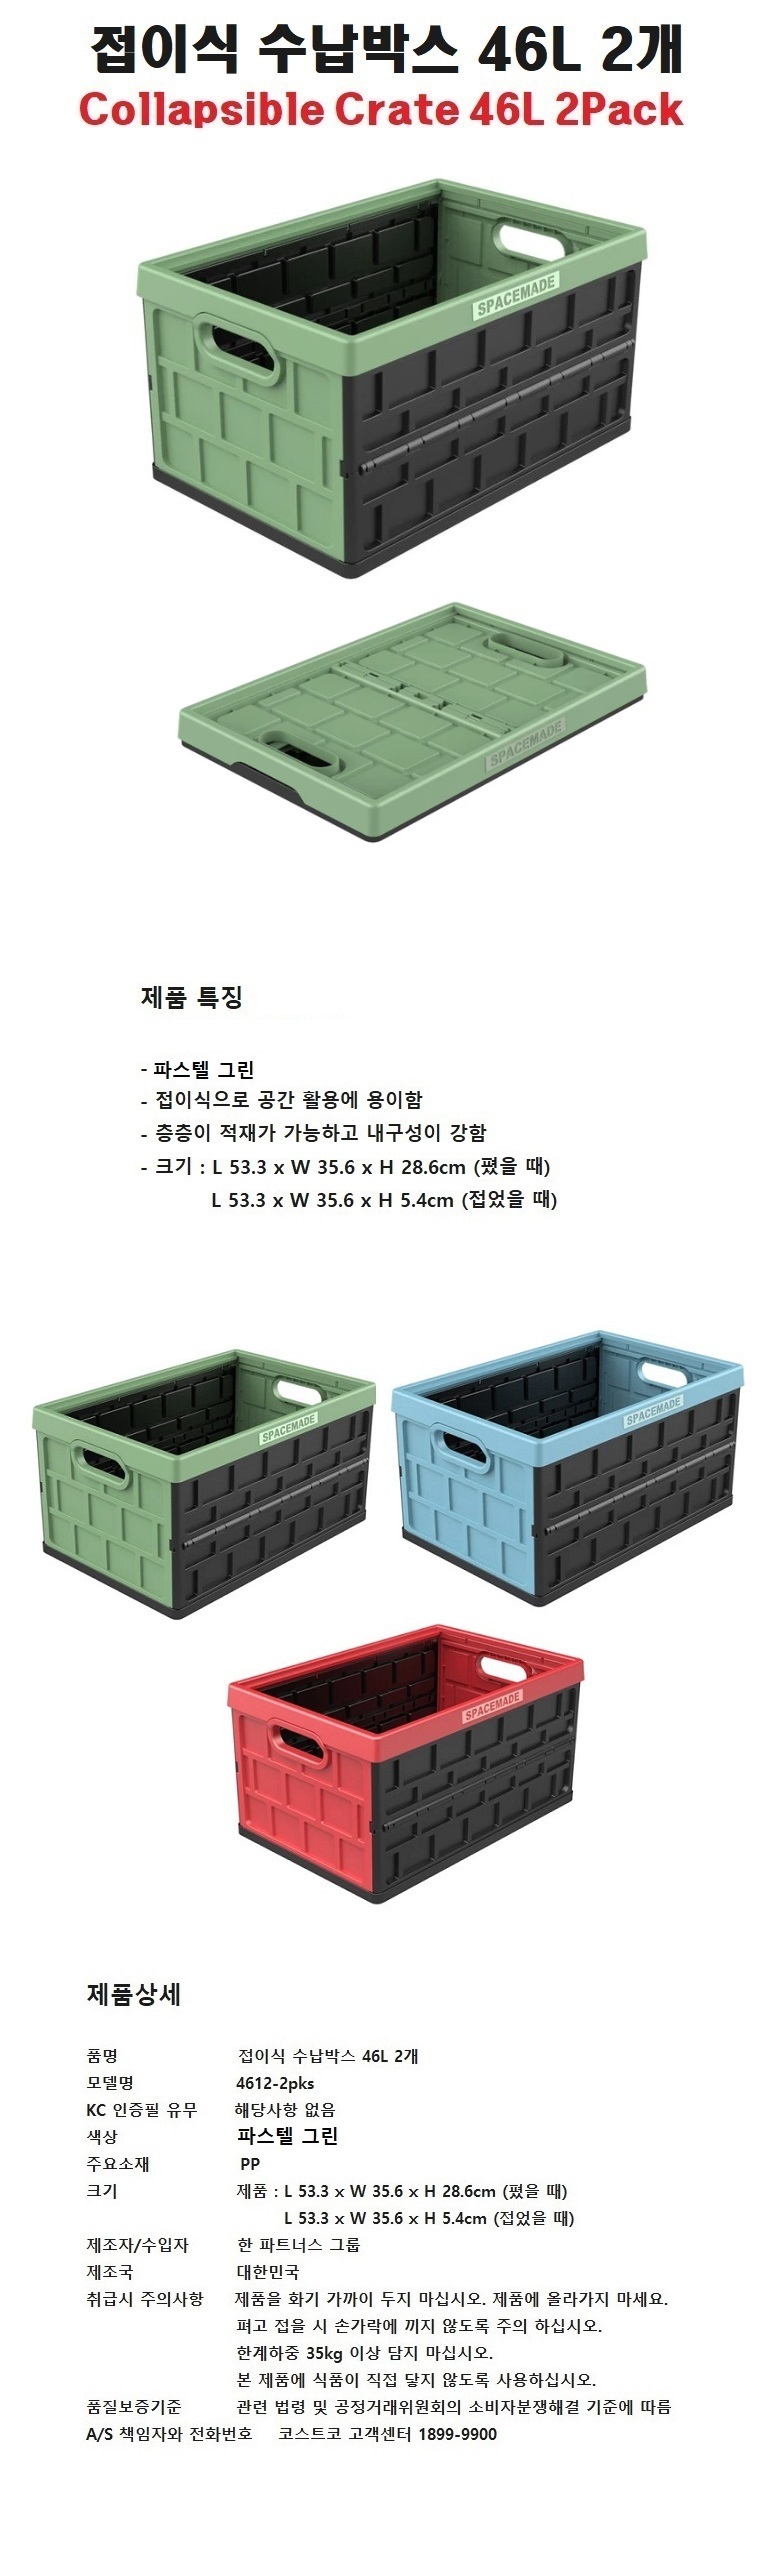 collapsible%20crate46l_green23990.jpg